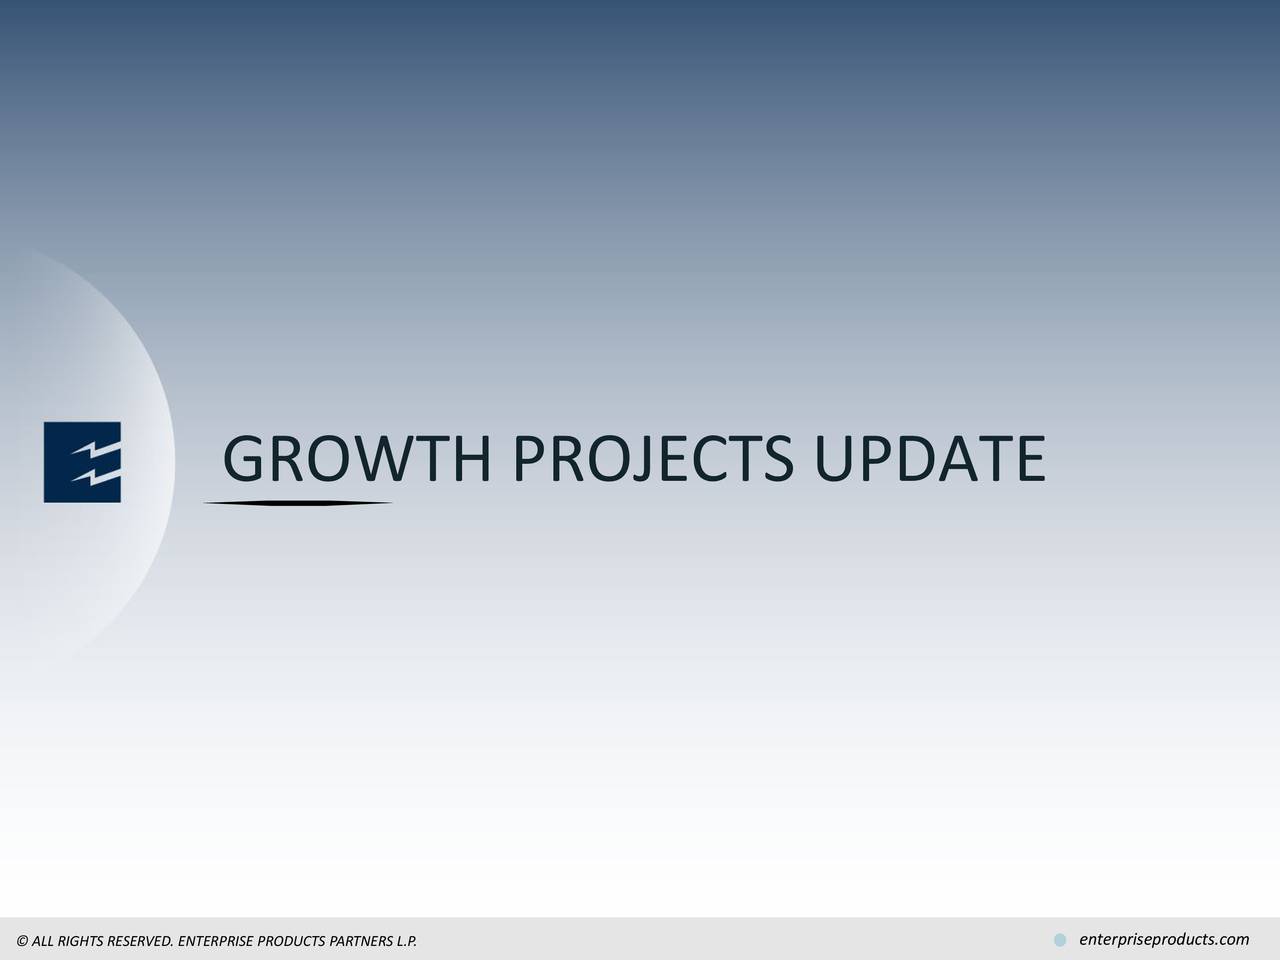 GROWTH PROJECTS UPDATE